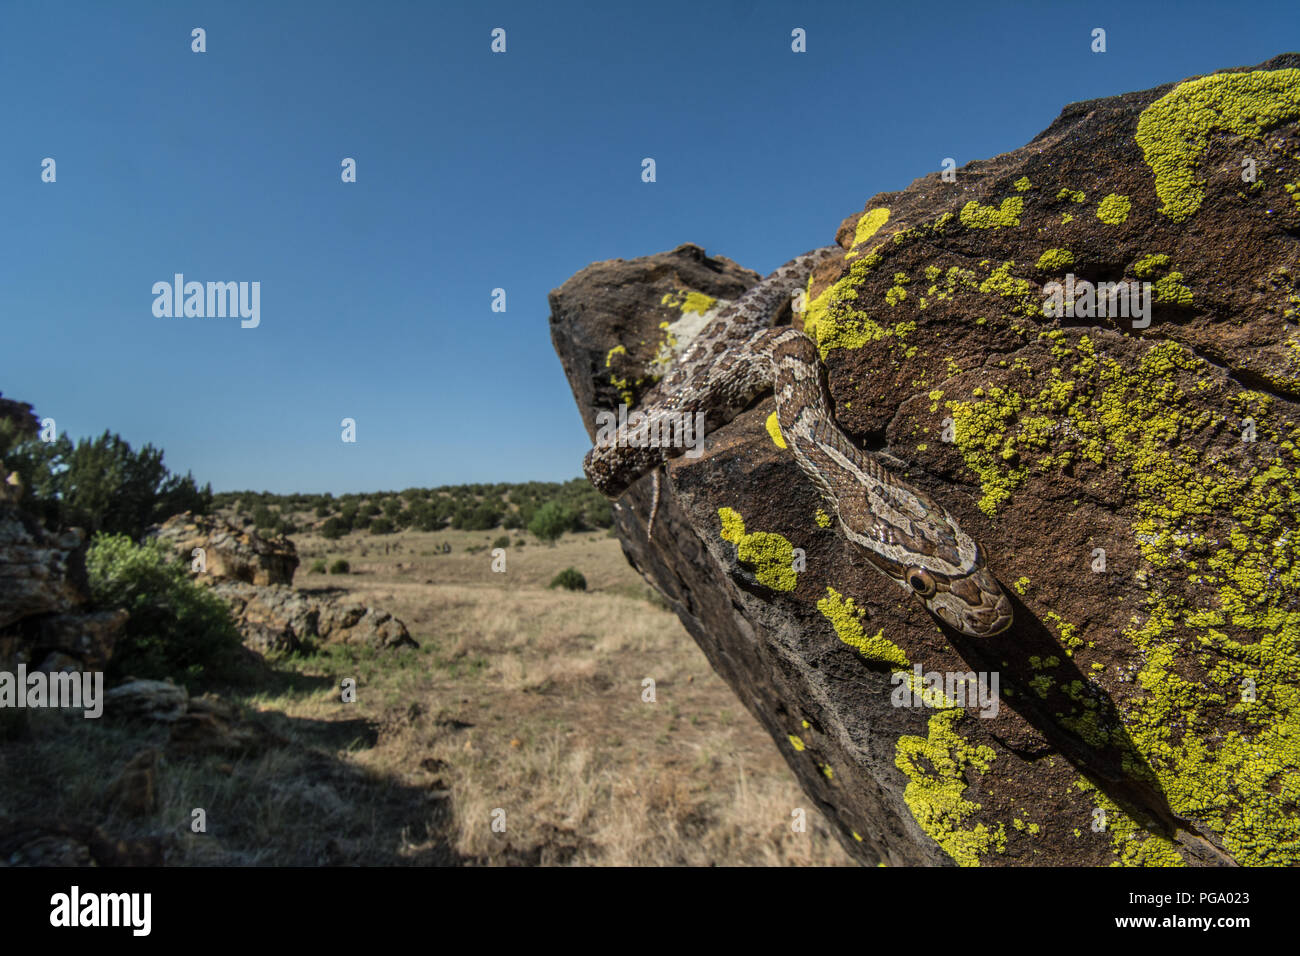 Great Plains Ratsnake (Pantherophis emoryi) found on the move in a rocky canyon in Otero County, Colorado, USA. Stock Photo